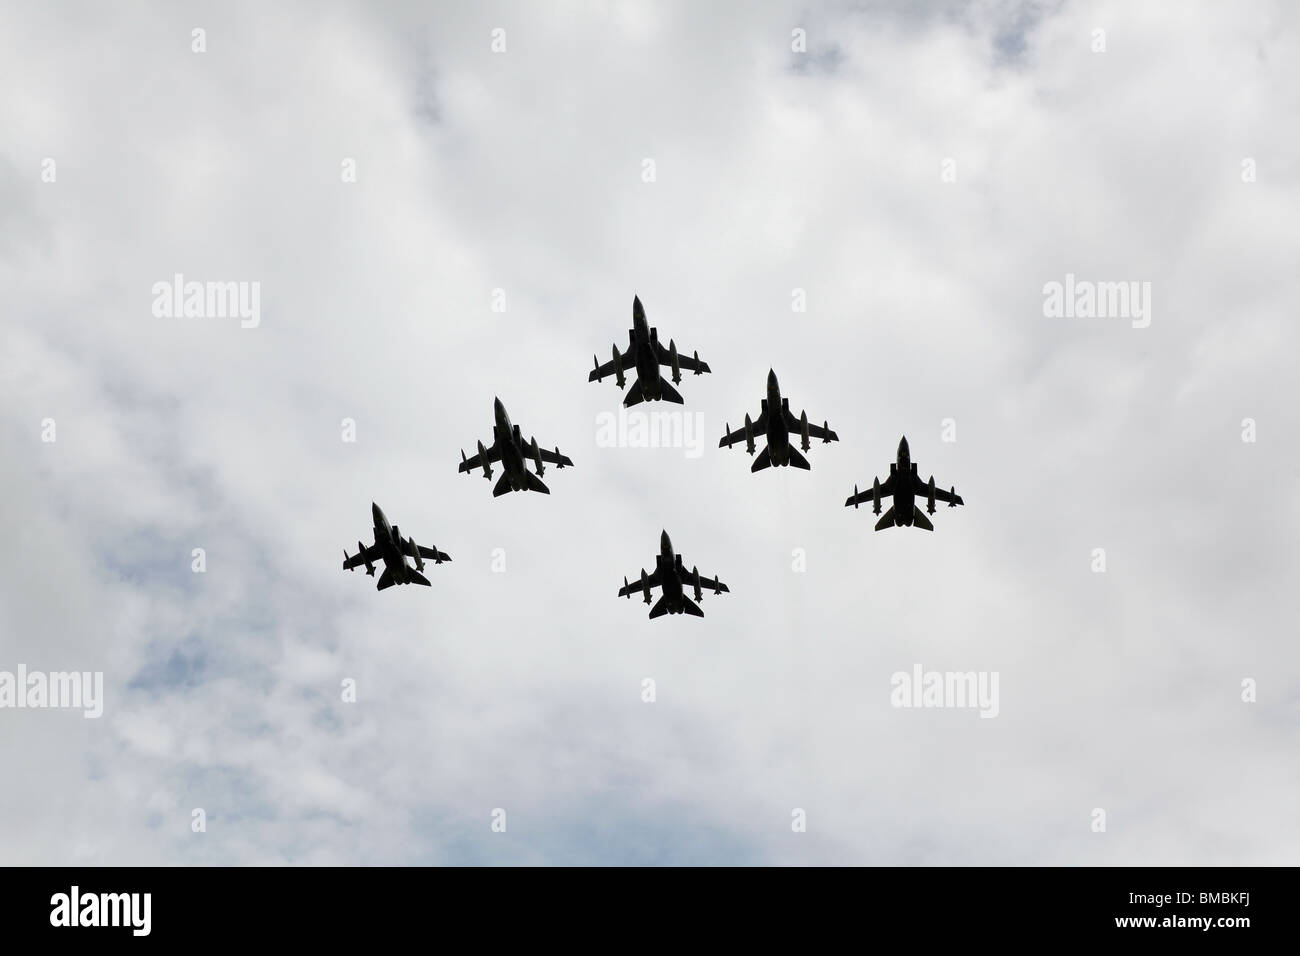 After arriving back in the UK six RAF Tornados fly towards the lens in formation. Stock Photo